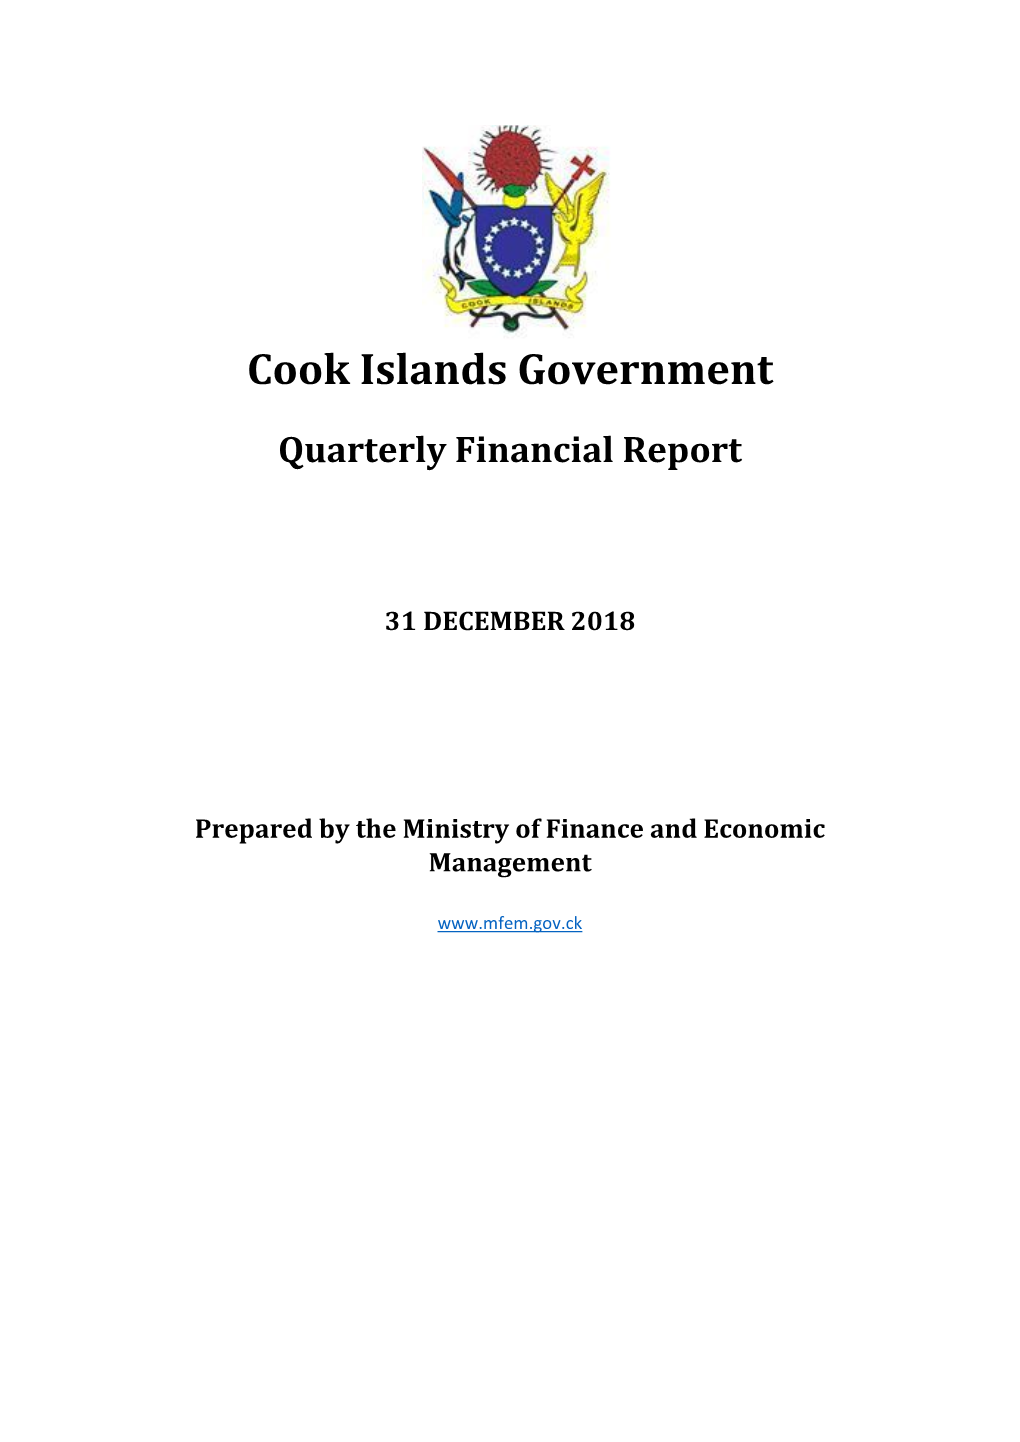 Cook Islands Government